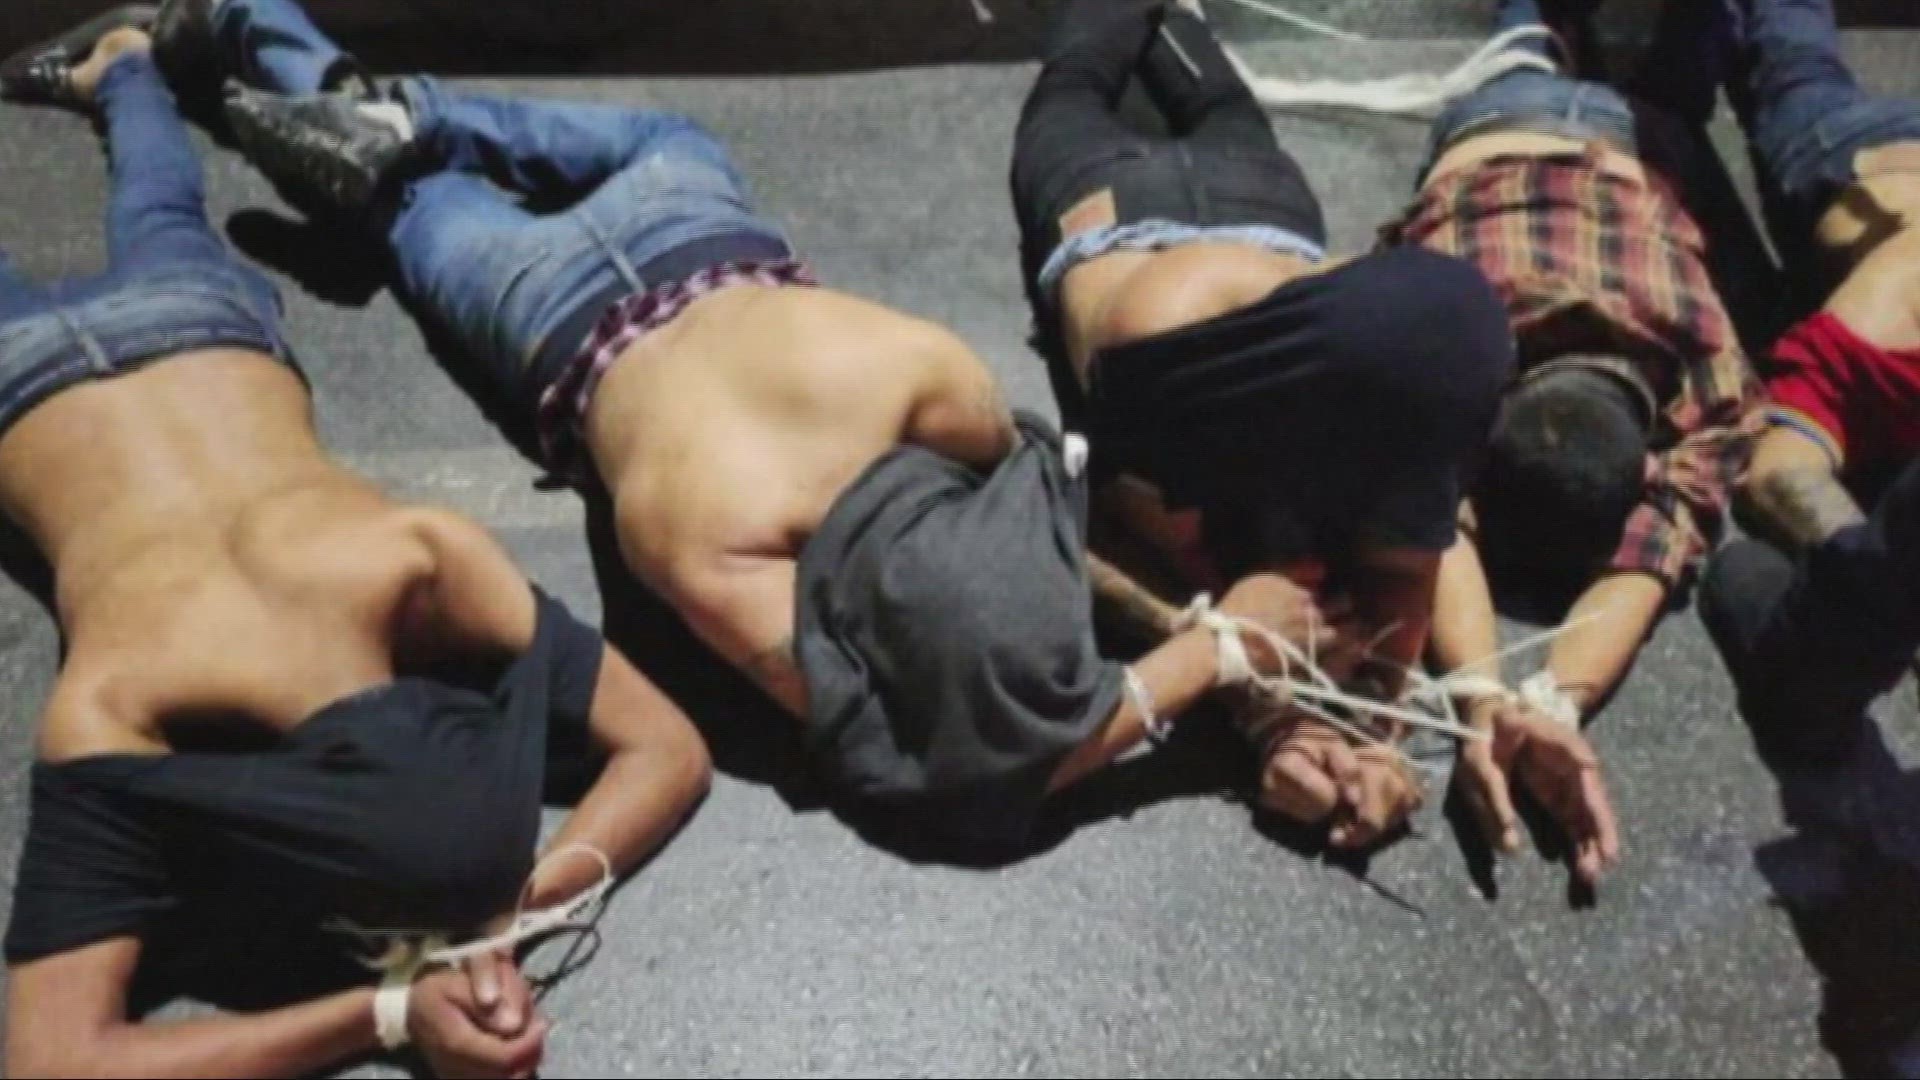 A photograph of five men face down on the pavement and bound accompanied the apology letter.